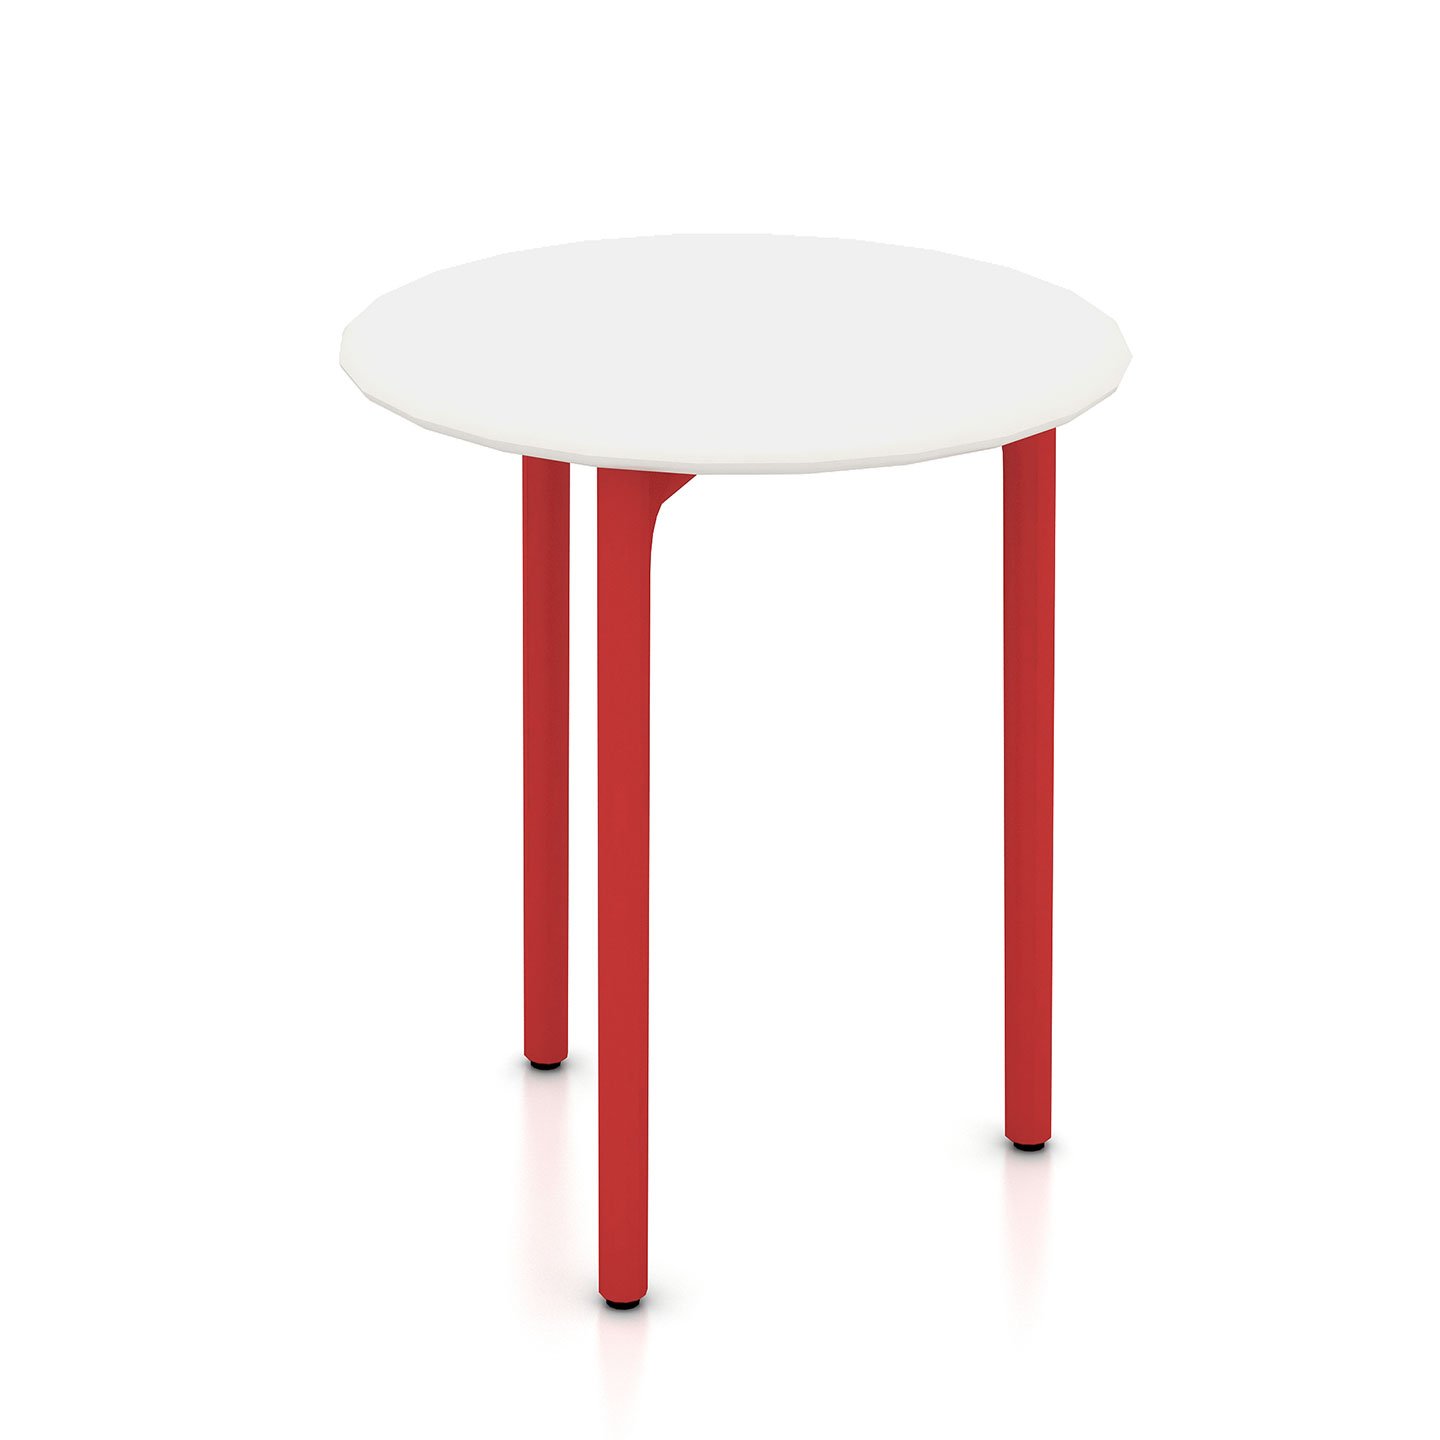 Haworth Openest Sprig Side Table with circular Chalk top and 3 red legs